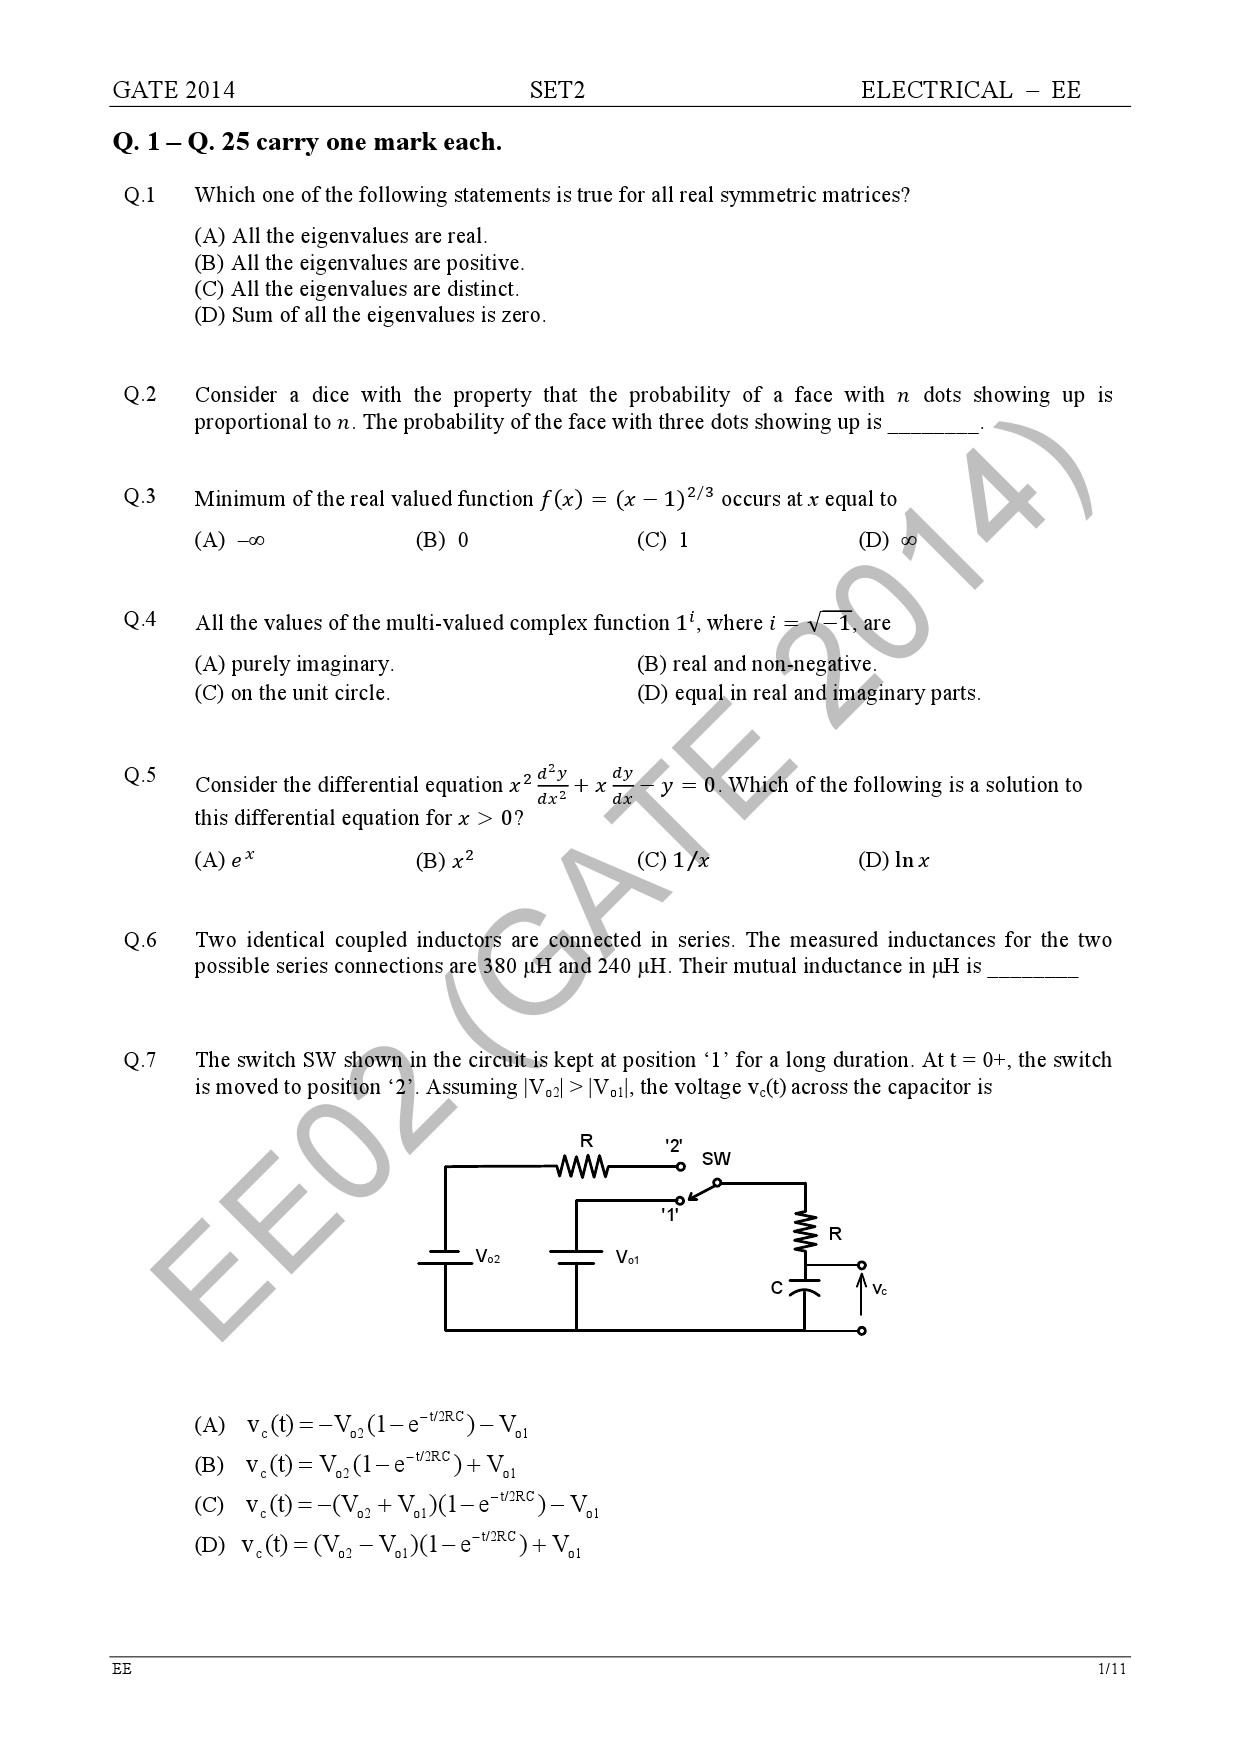 GATE Exam Question Paper 2014 Electrical Engineering Set 2 7